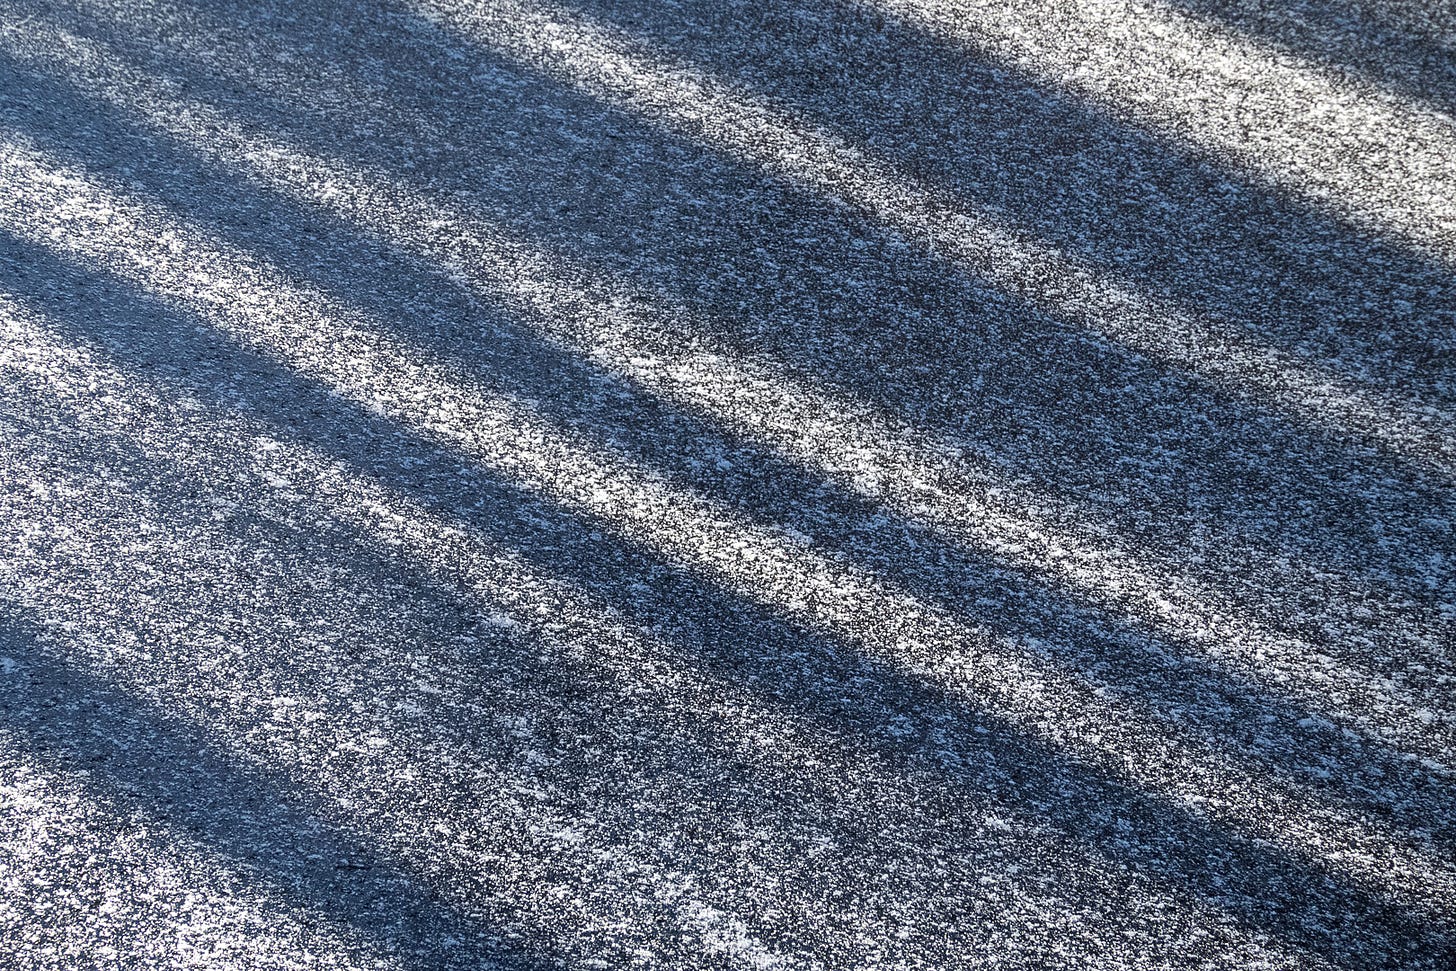 Monochromatic pattern of diagonal lines from shadows cast by birch trees on snow dusted ice